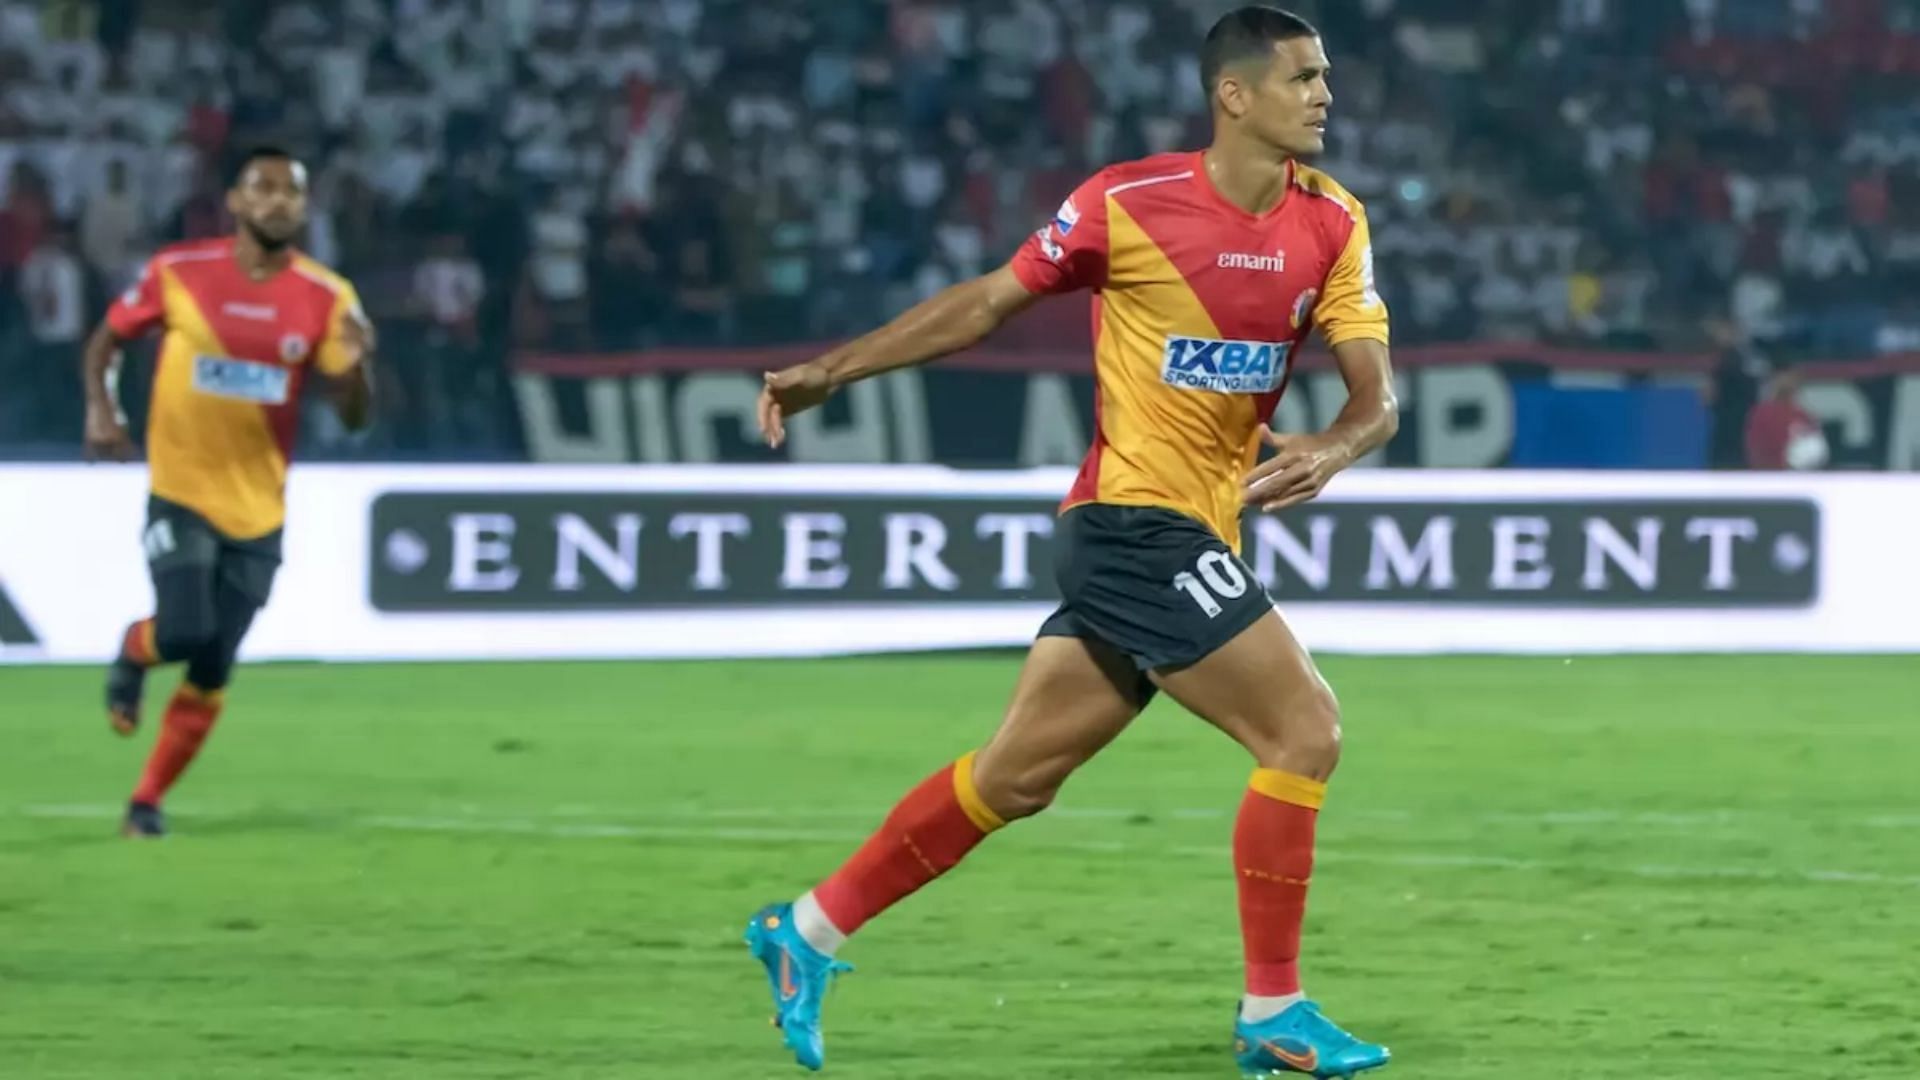 Despite the in-flux of new signings, Cleiton Silva will continue to be the main man in front of goal for East Bengal FC.